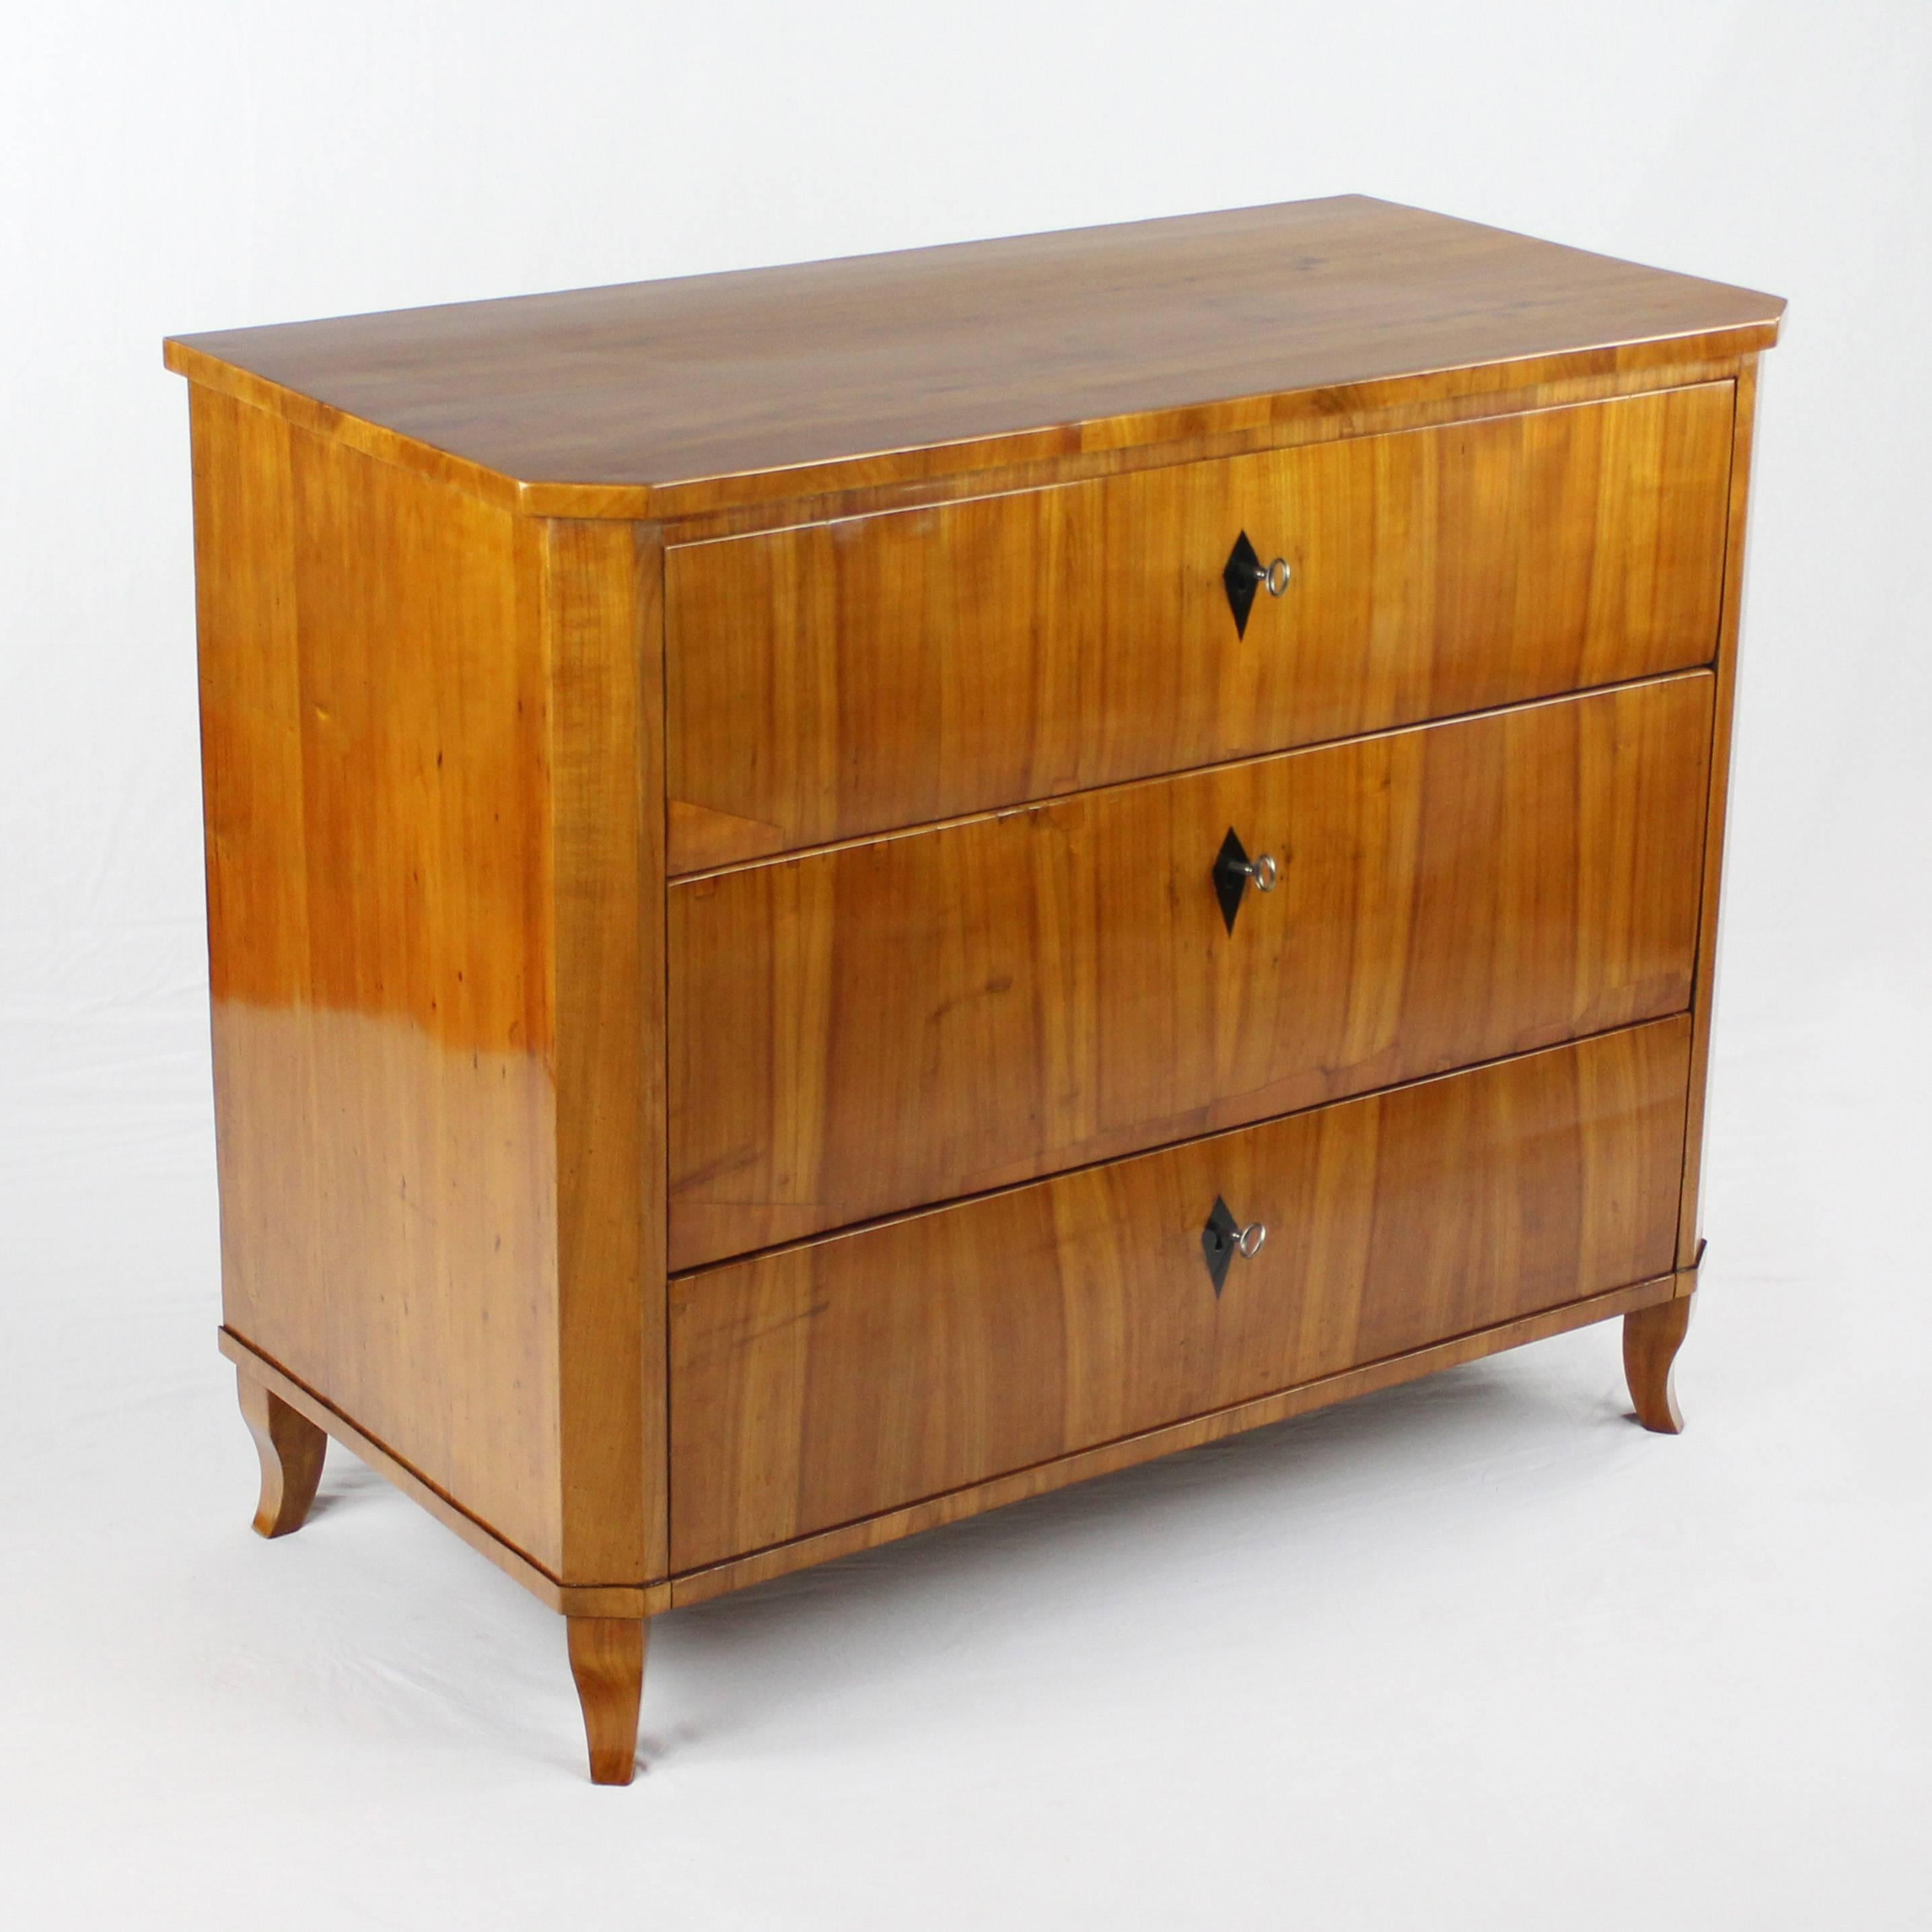 Chest of drawers, circa 1820-1830
Cherry tree on softwood body veneered
Three drawers
Nice veneer image
Bevelled corners
Restored residential-ready state
French Shellac hand polish
Measures: Height 84 cm, width 99 cm, depth 51 cm.

I